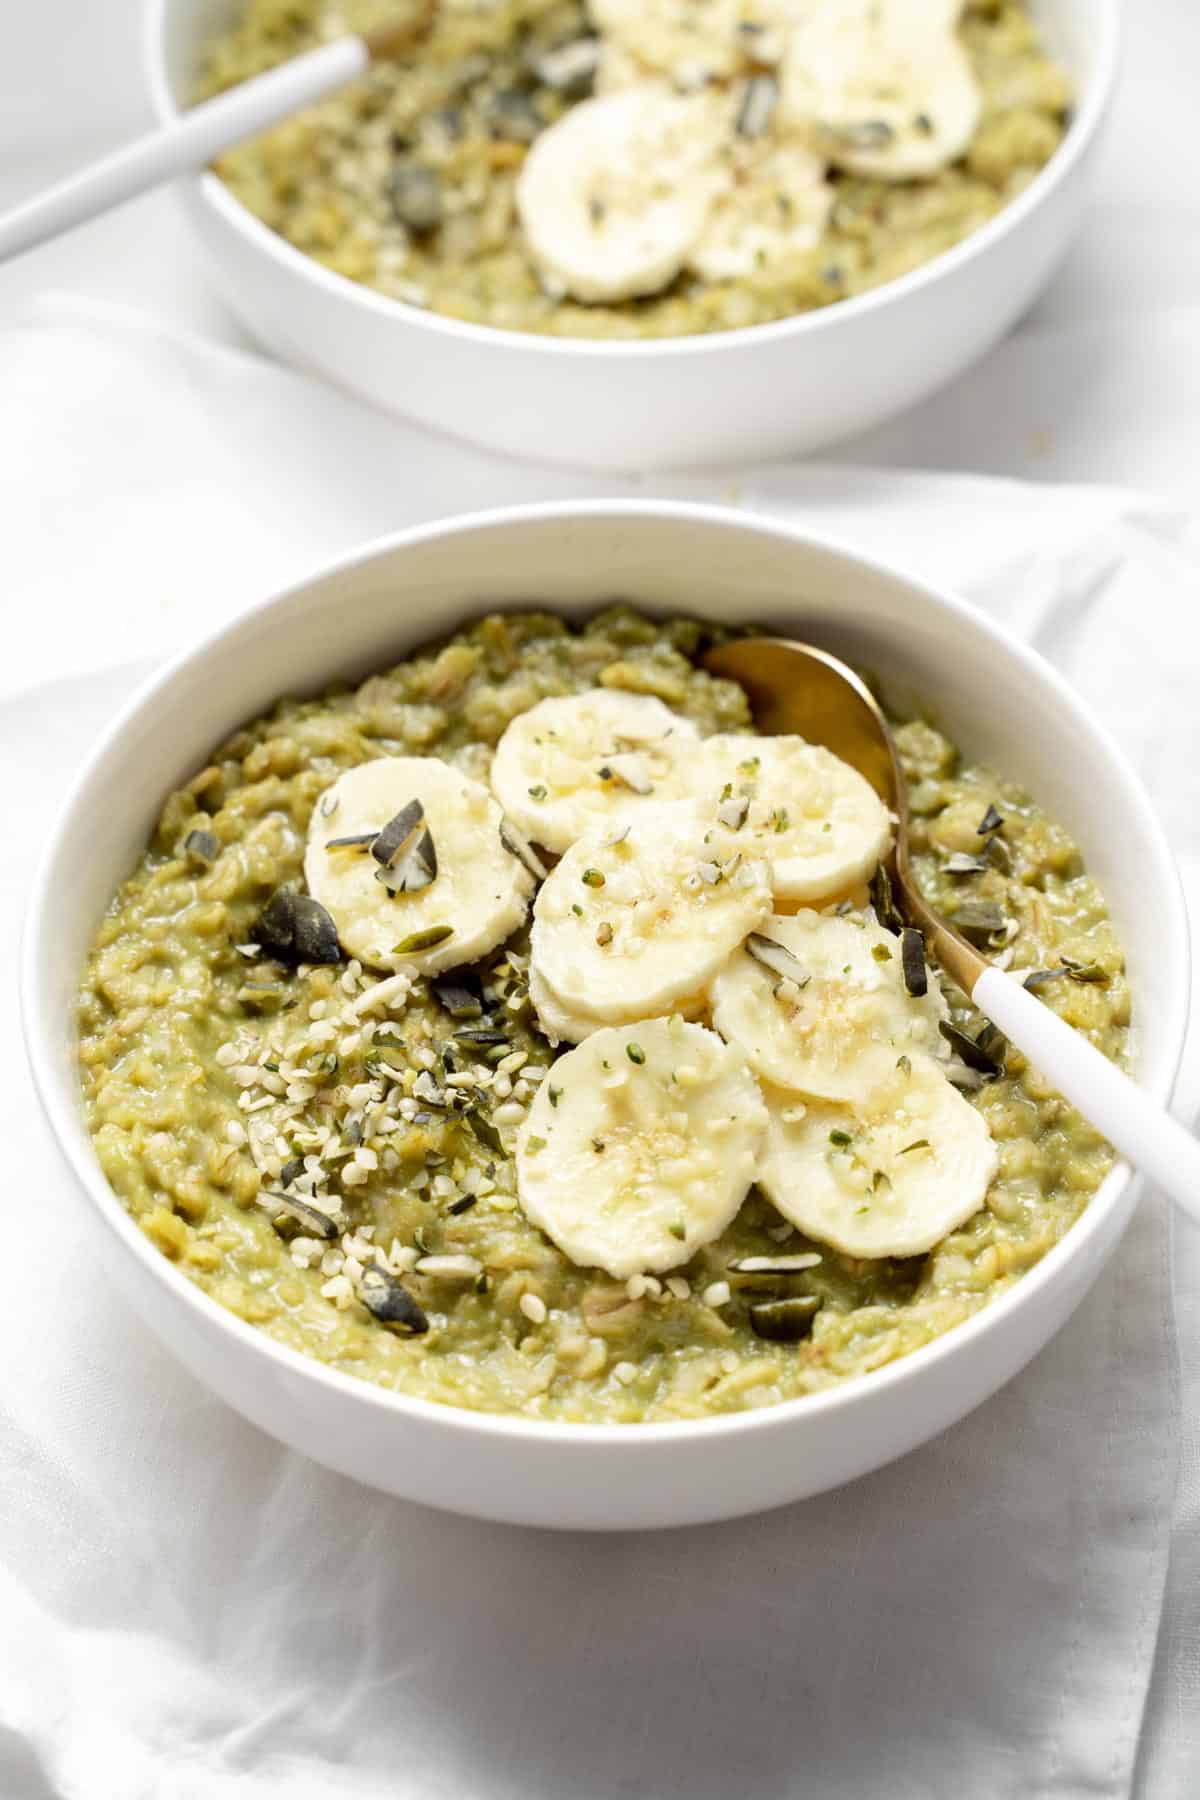 An angled view of a bowl of matcha oatmeal with sliced bananas and hemp seeds on top with a spoon tucked in.